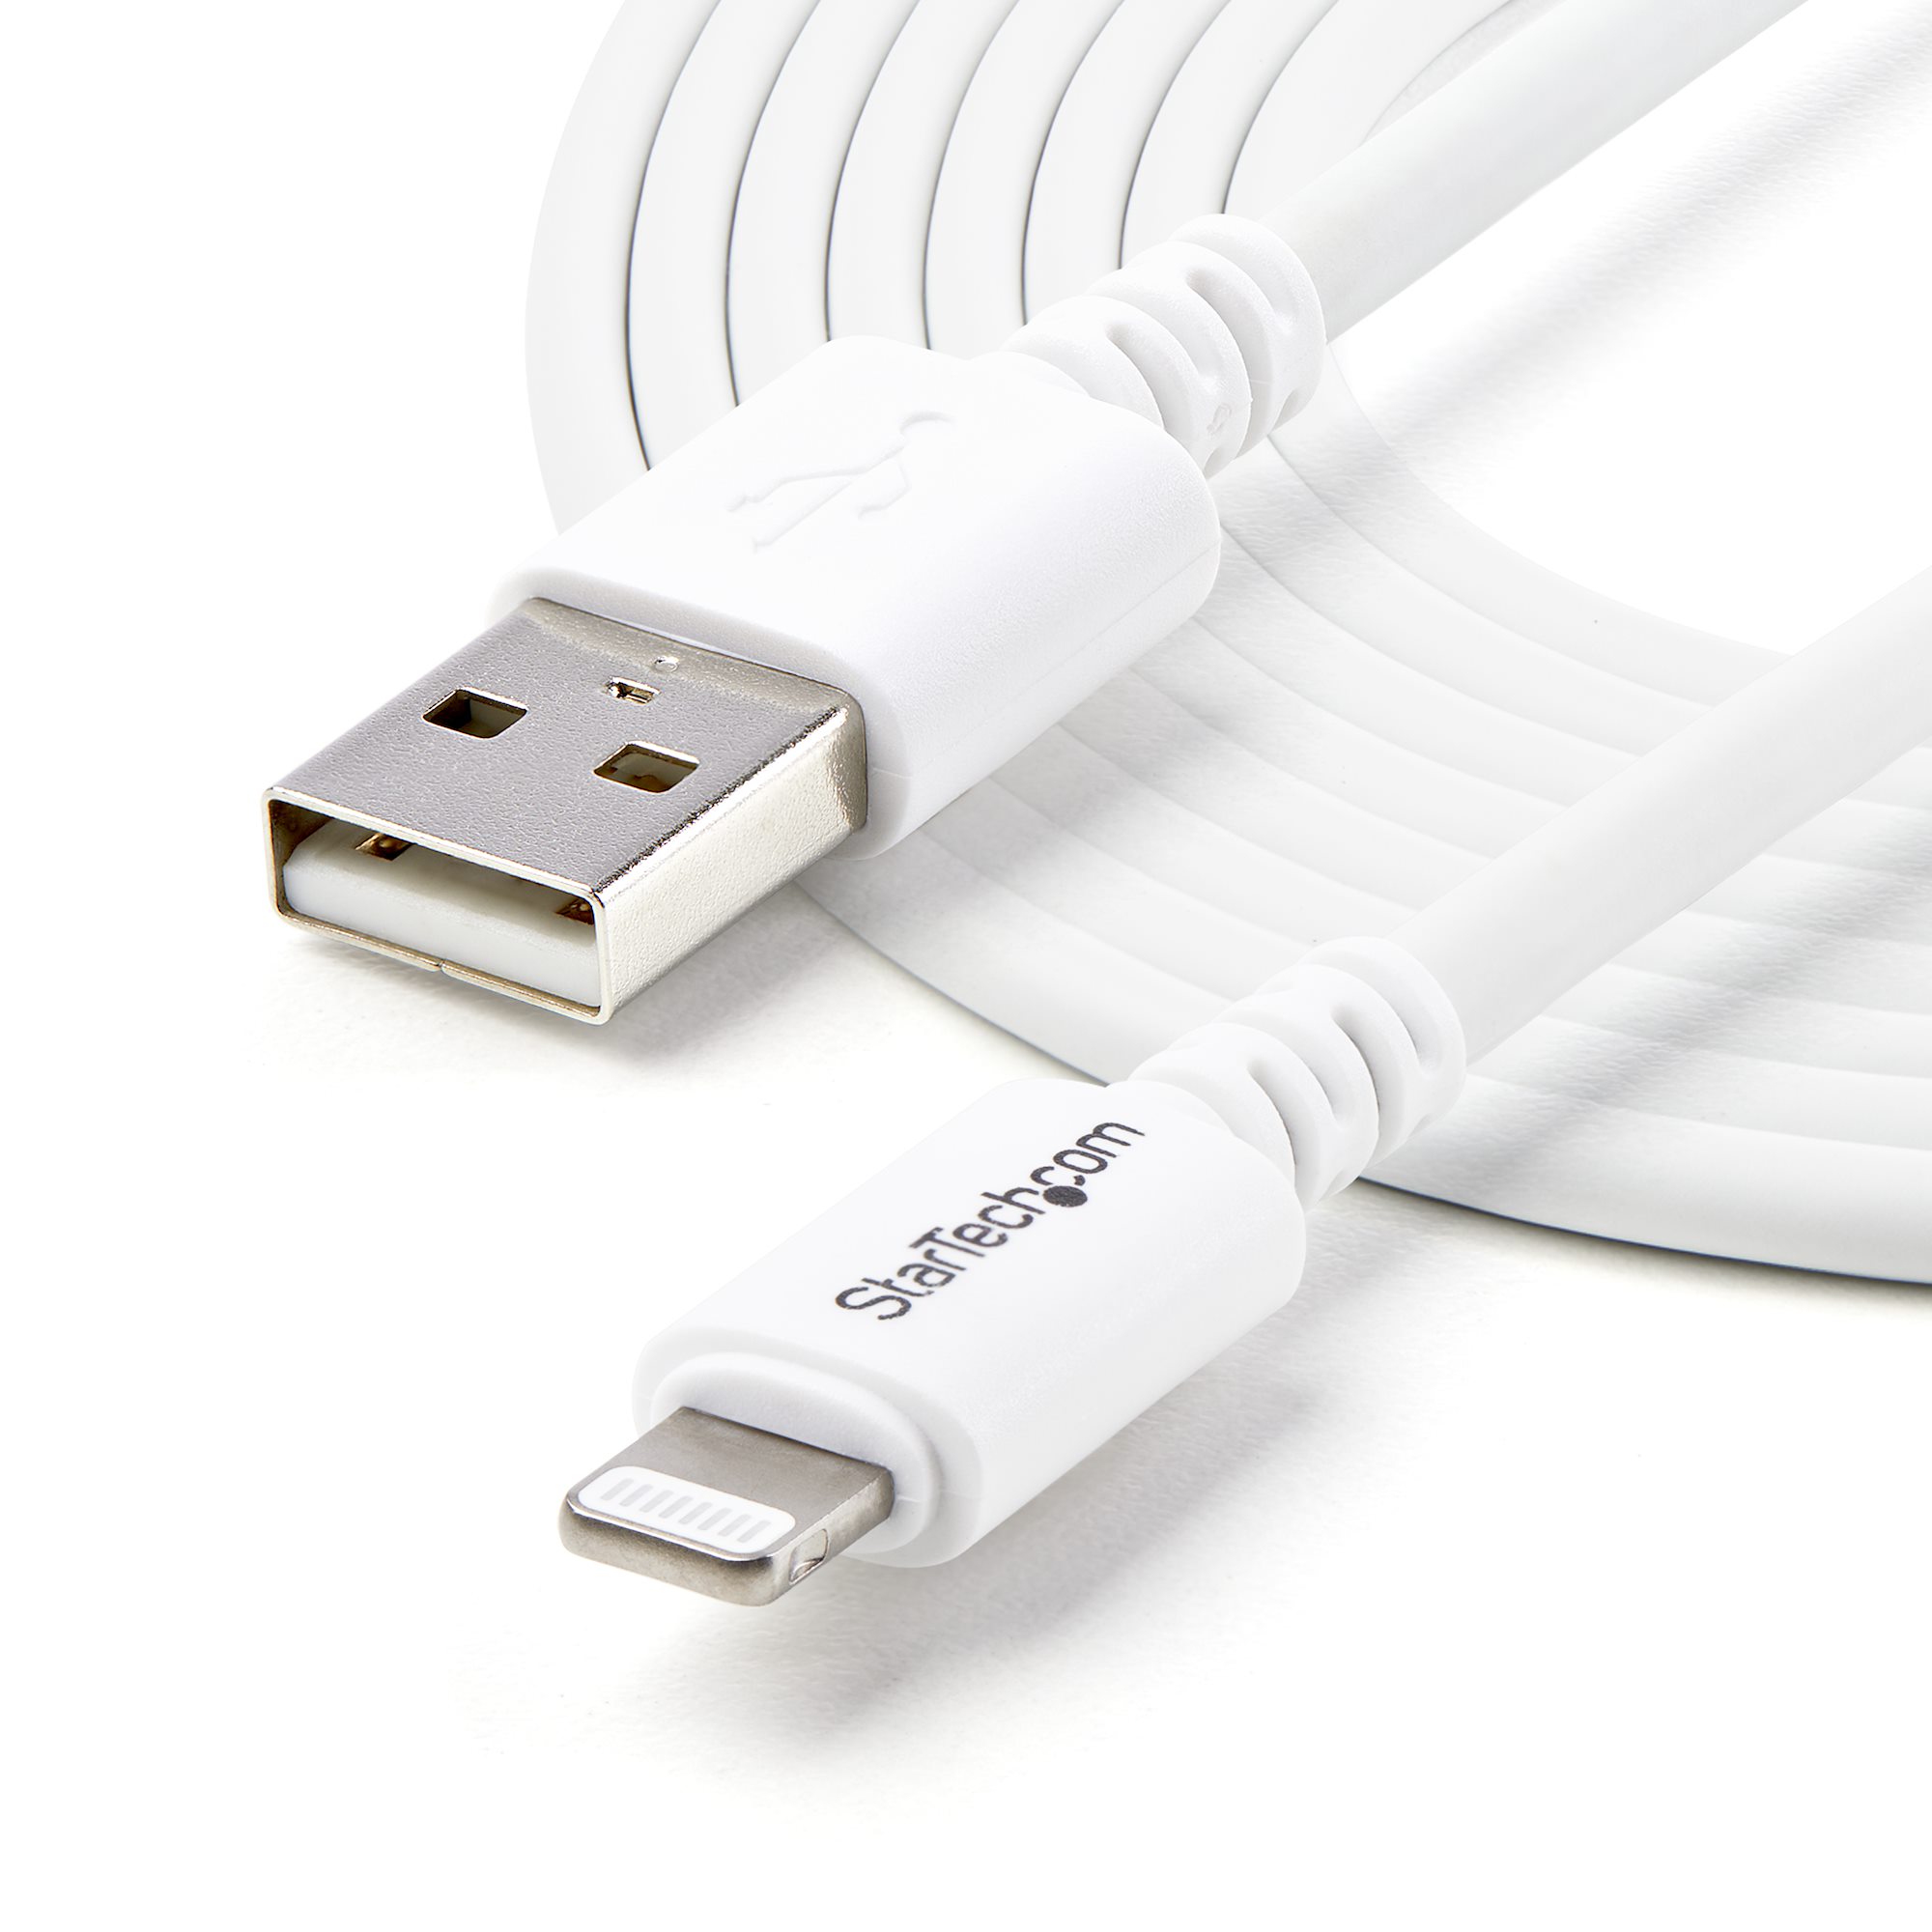 Excel Berri Pris 10 ft White 8-pin Lightning to USB Cable - Lightning Cables | Cables |  StarTech.com